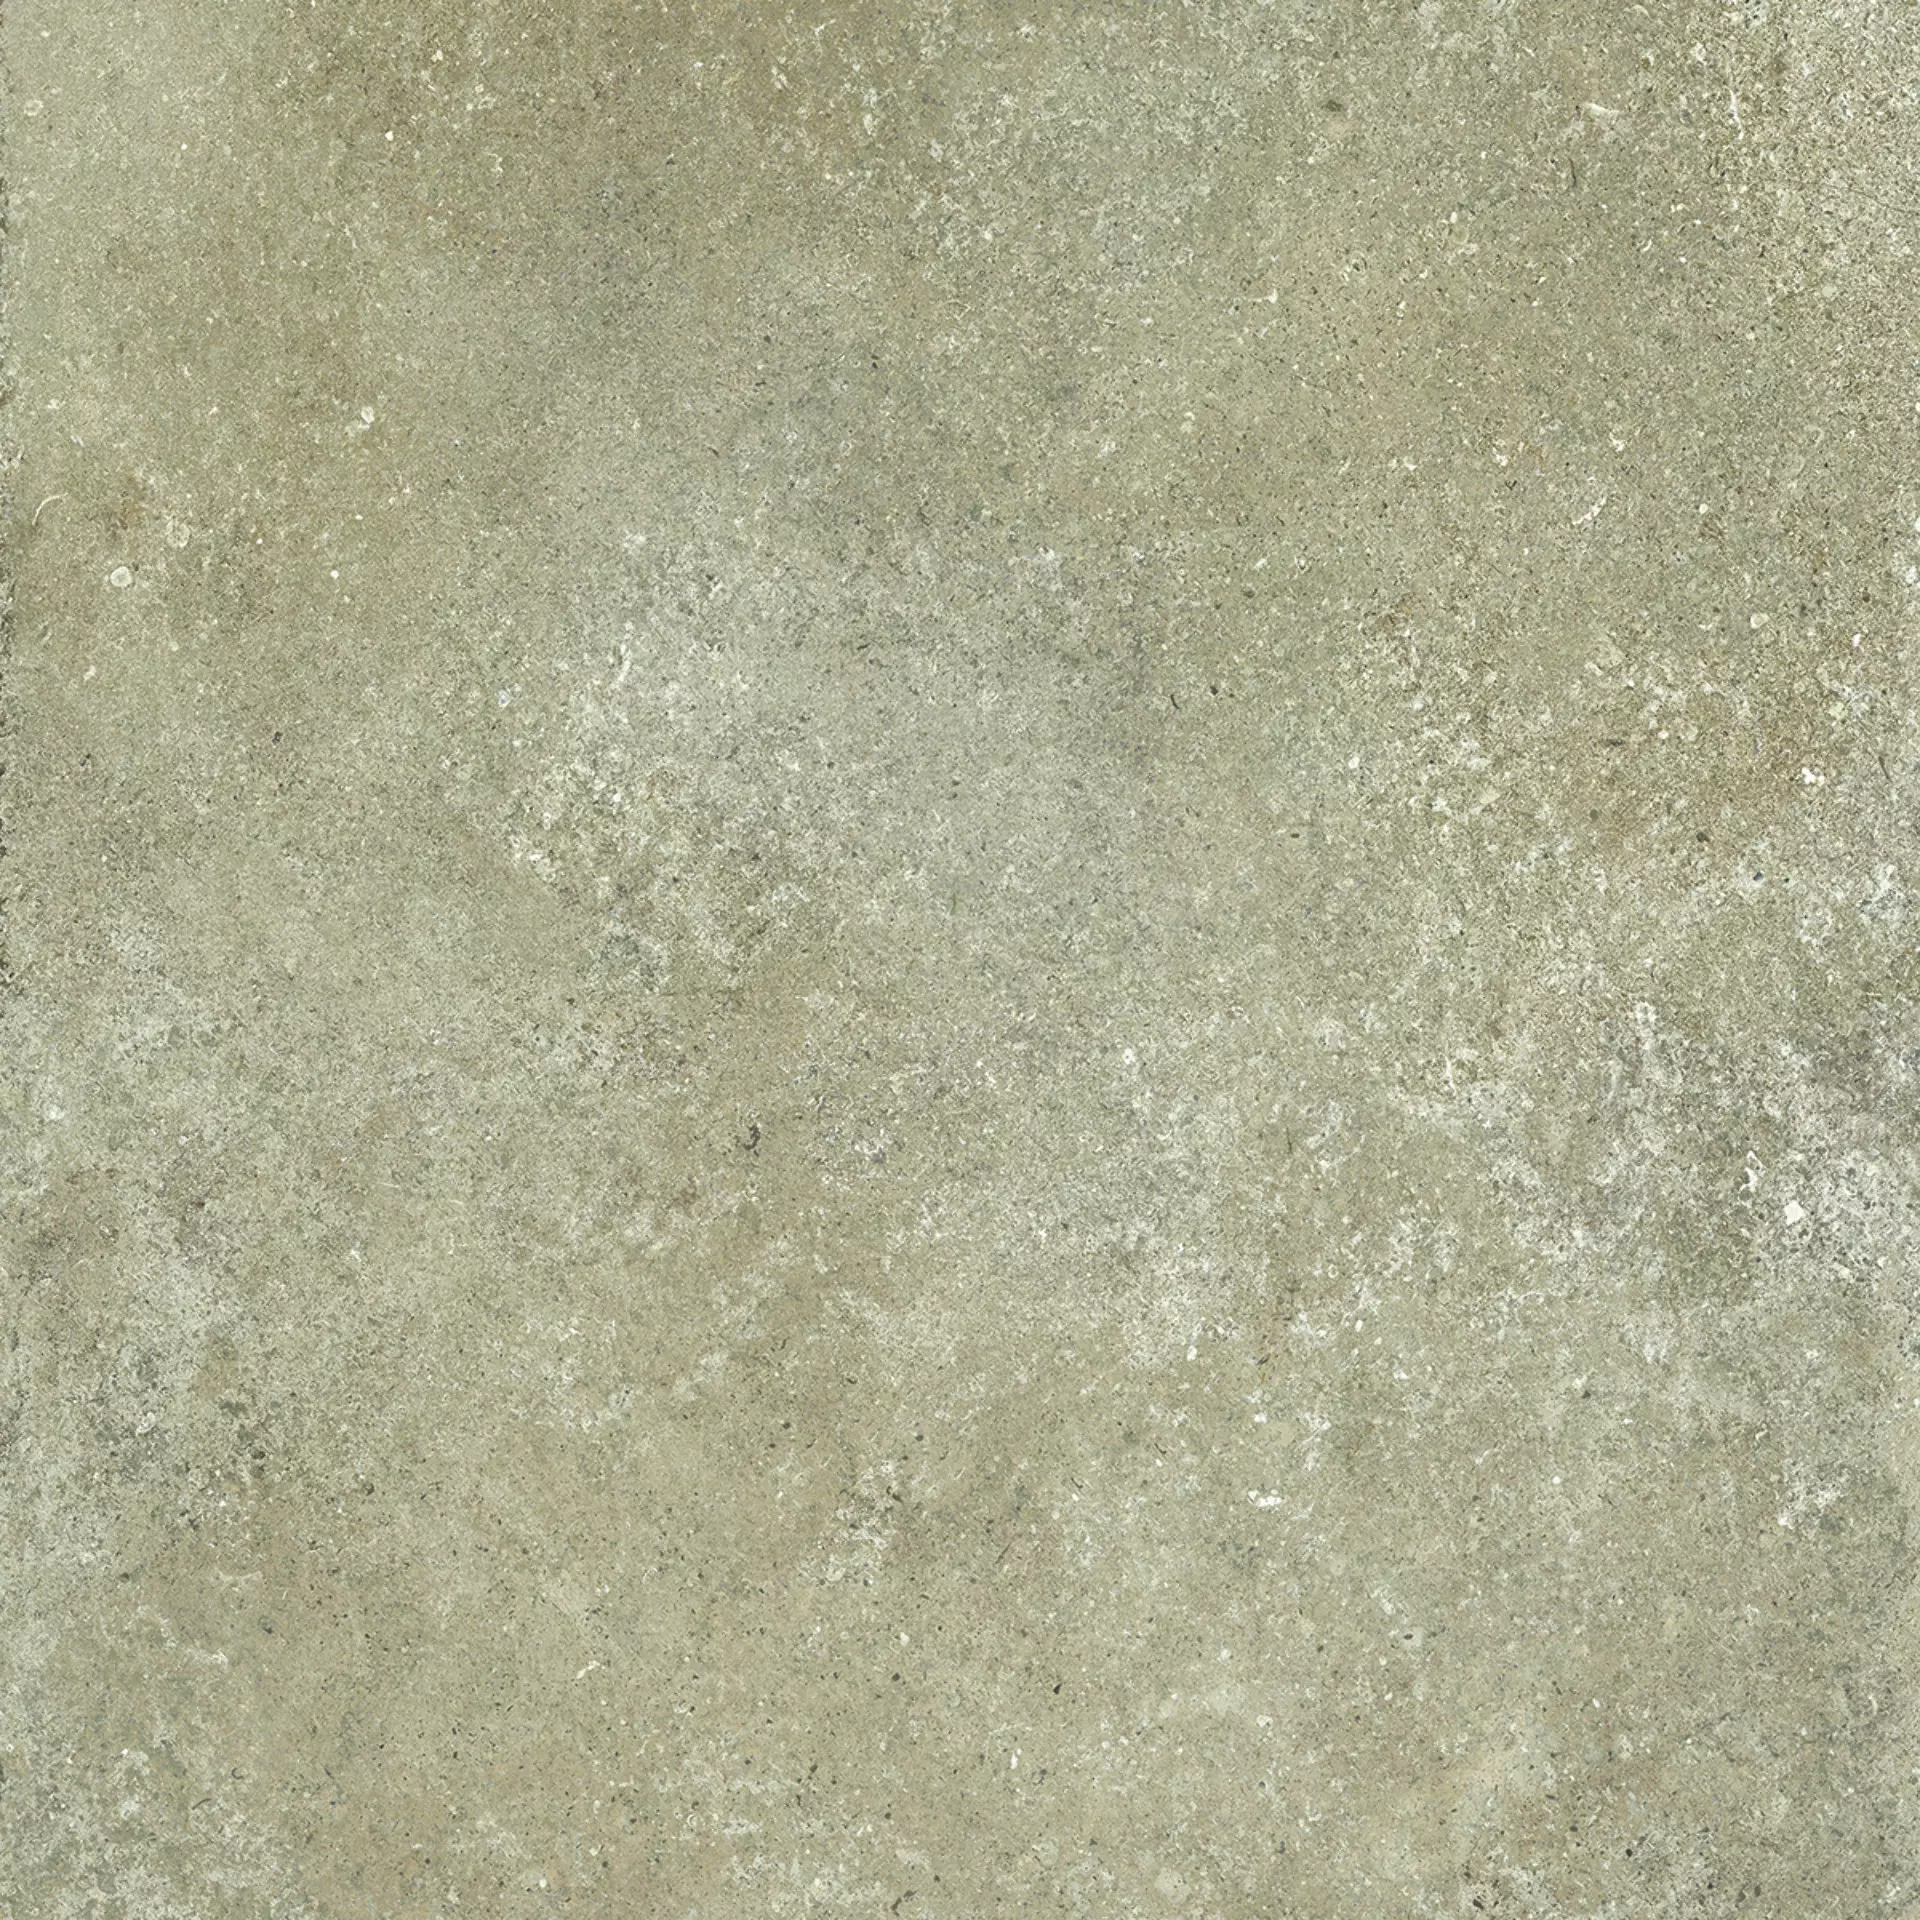 Alfalux Cottage Taupe Silk 8290138 60x60cm rectified 9mm